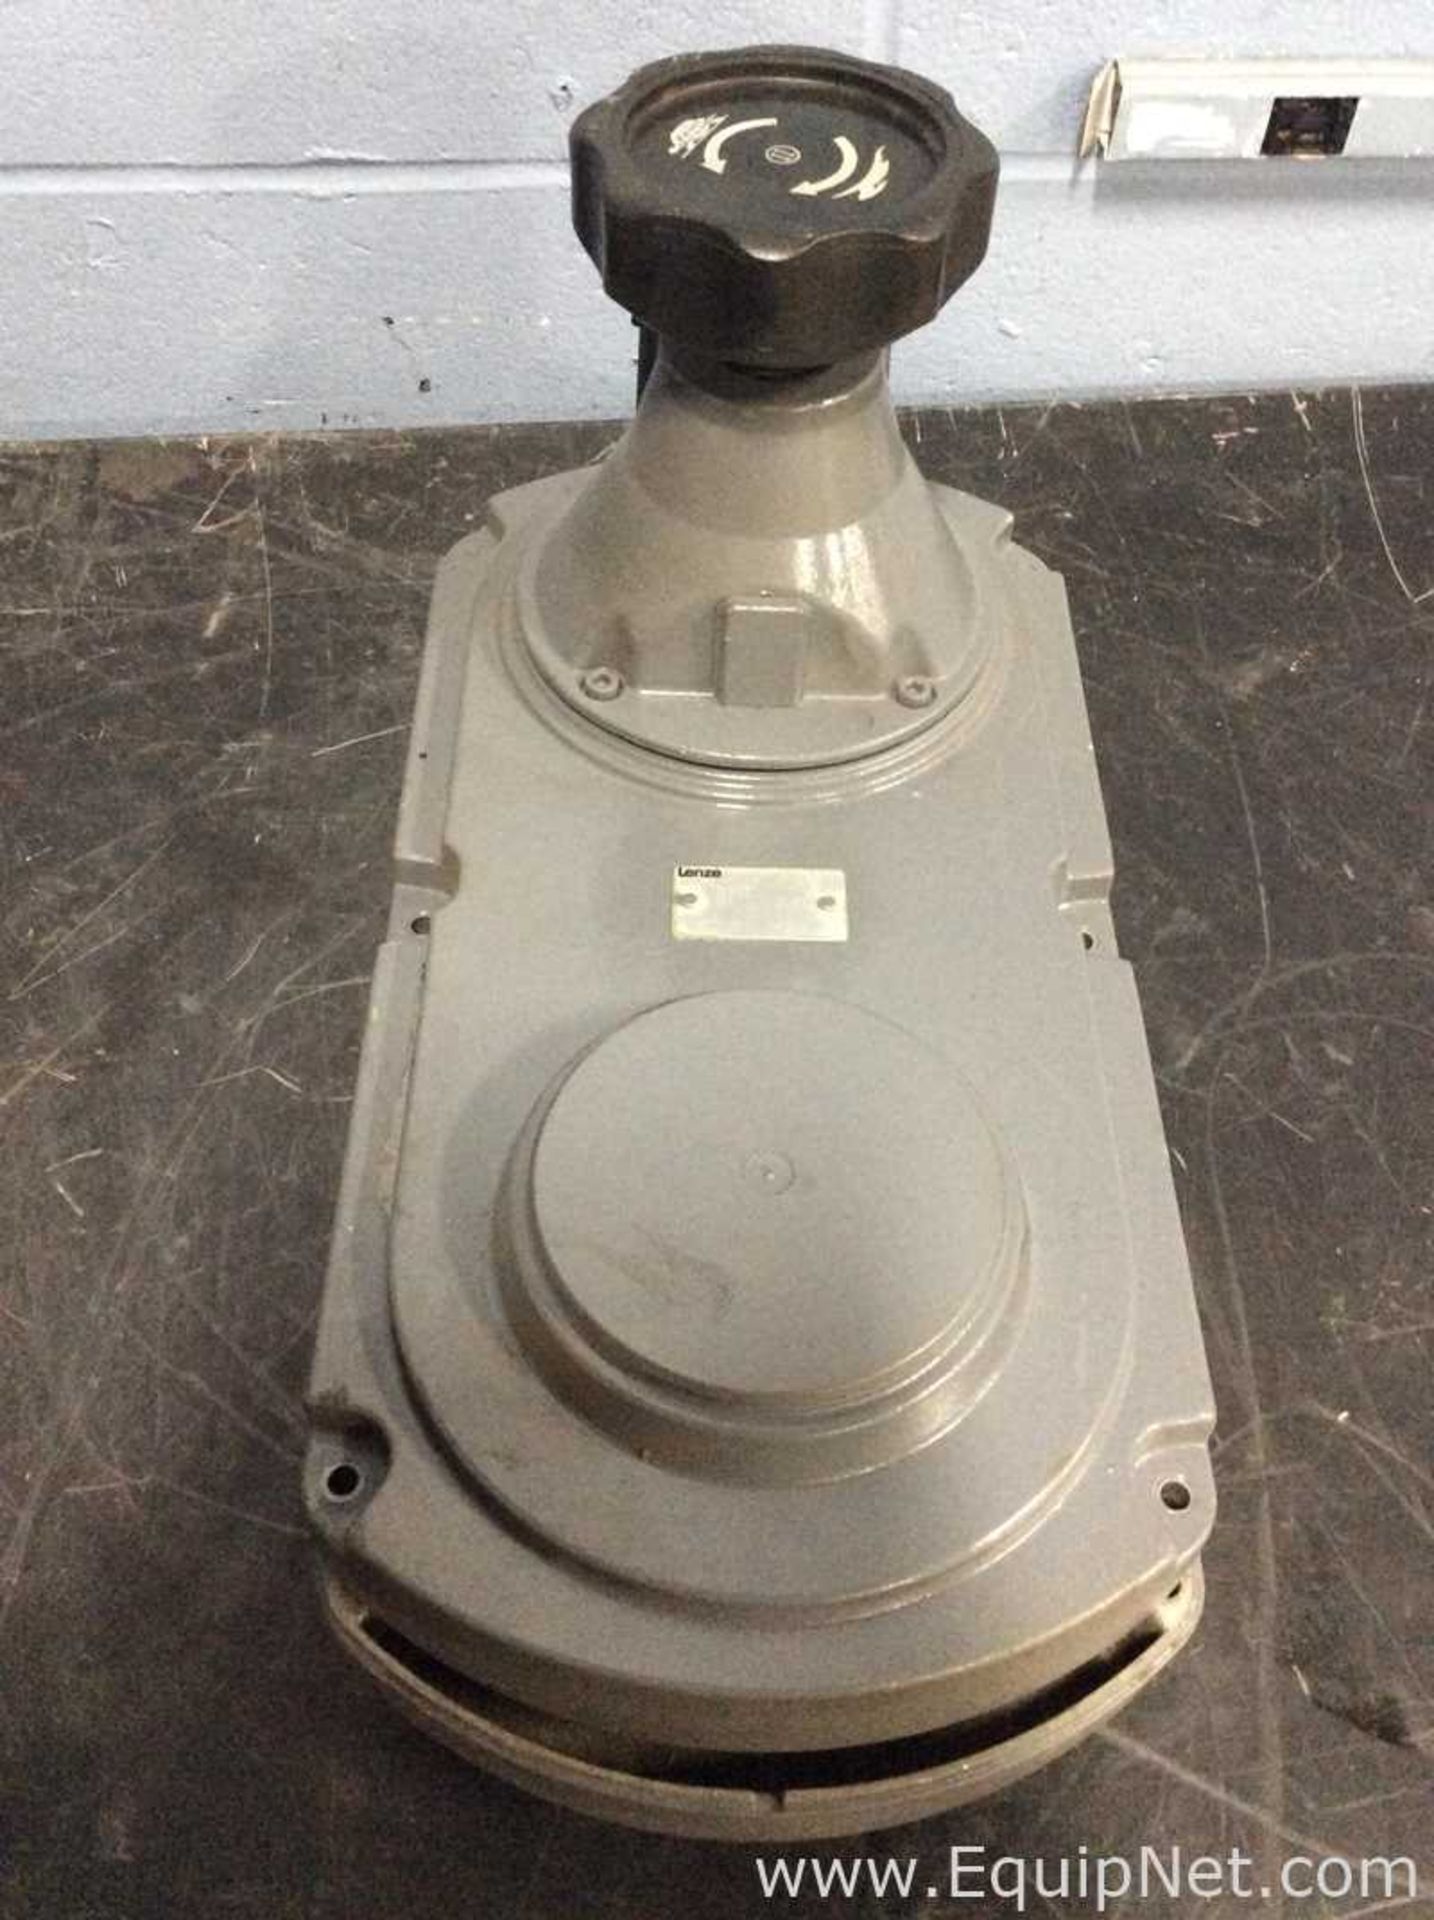 Lenze 12.206 electric Motor With Drive Box - Image 6 of 8